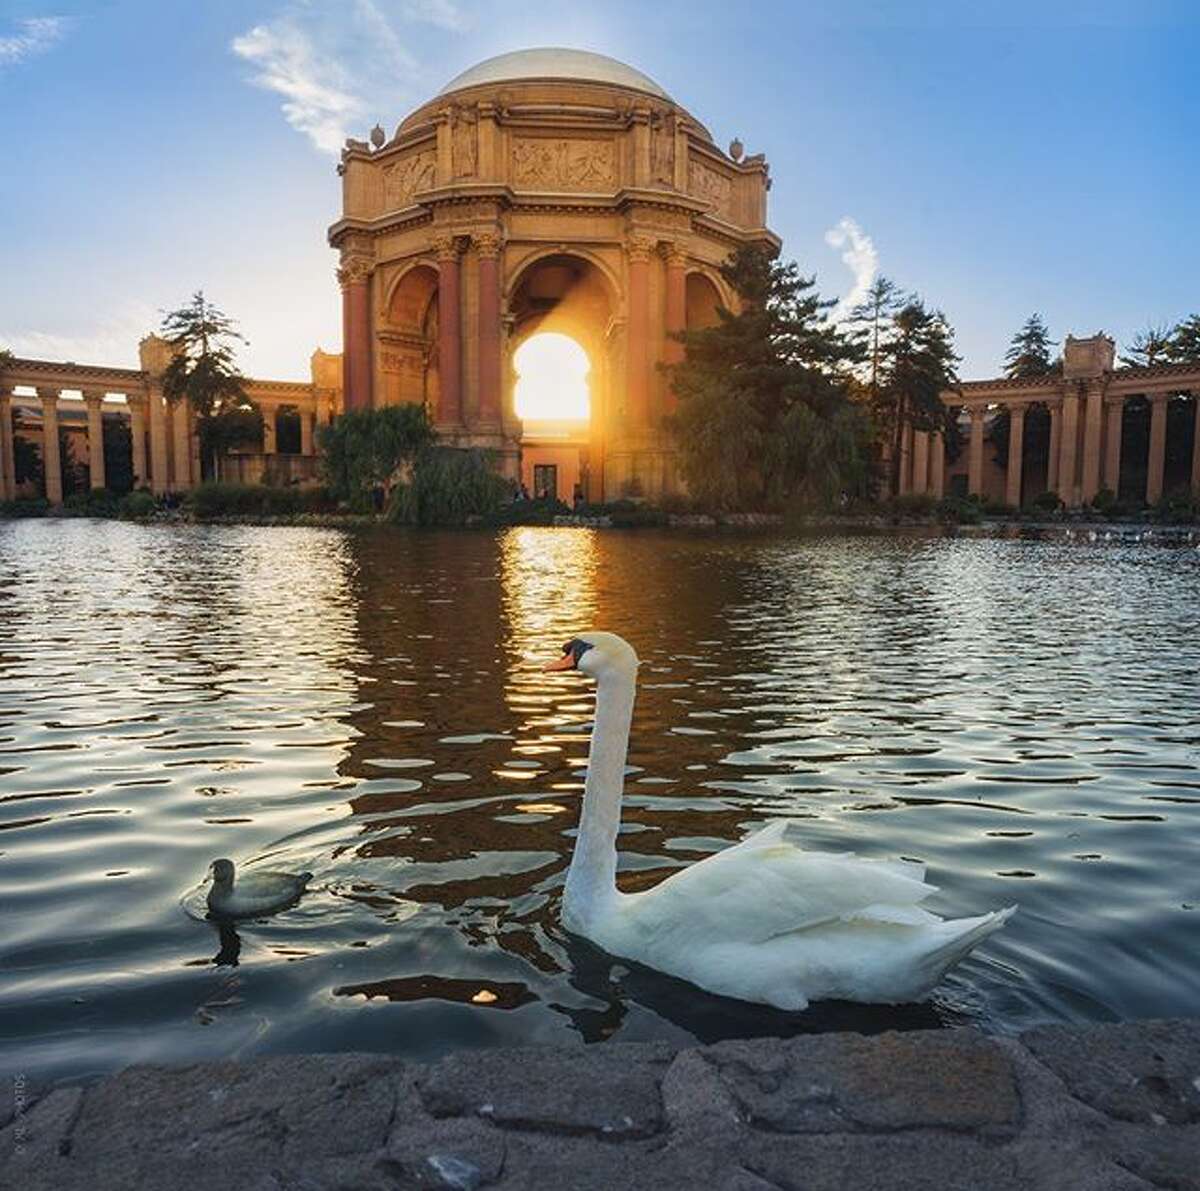 Golden hour with the Palace of Fine Art's lagoon residents by @myfrisco.